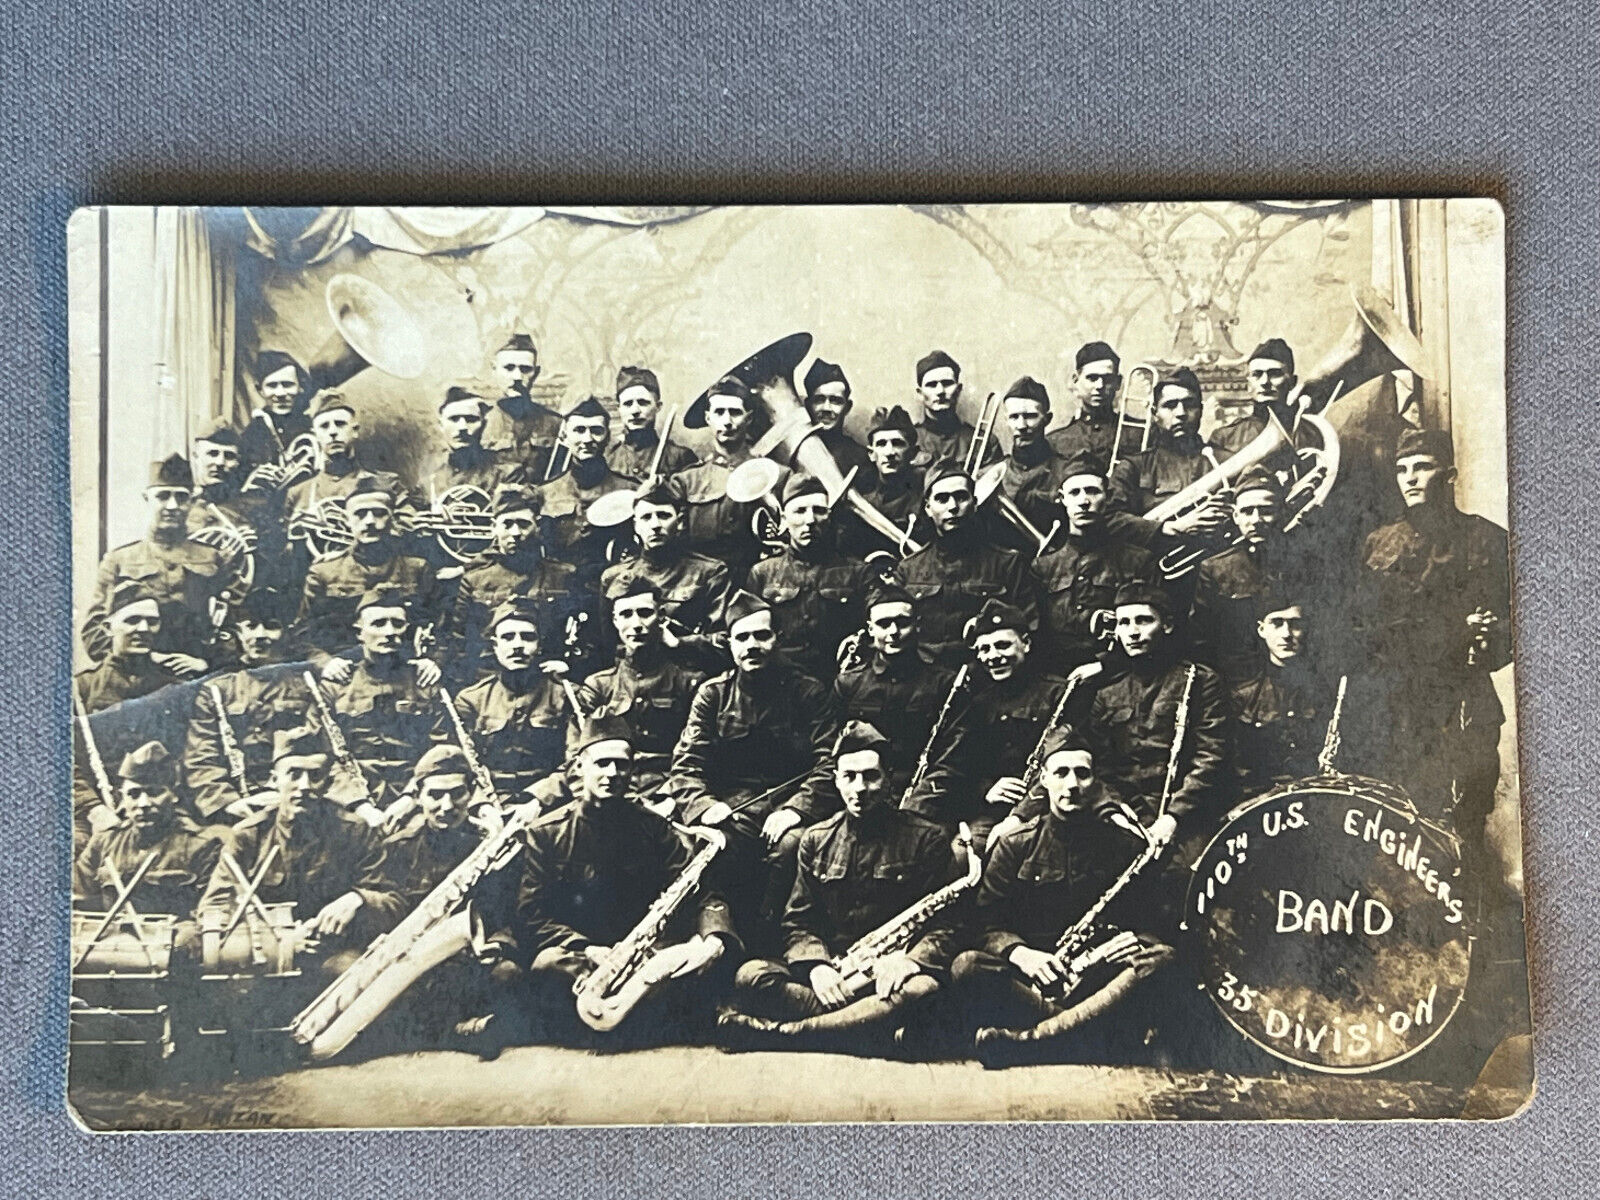 Real Photo Postcard, 110th U.S. Engineers Band 35th Division, Saxophones, 1919